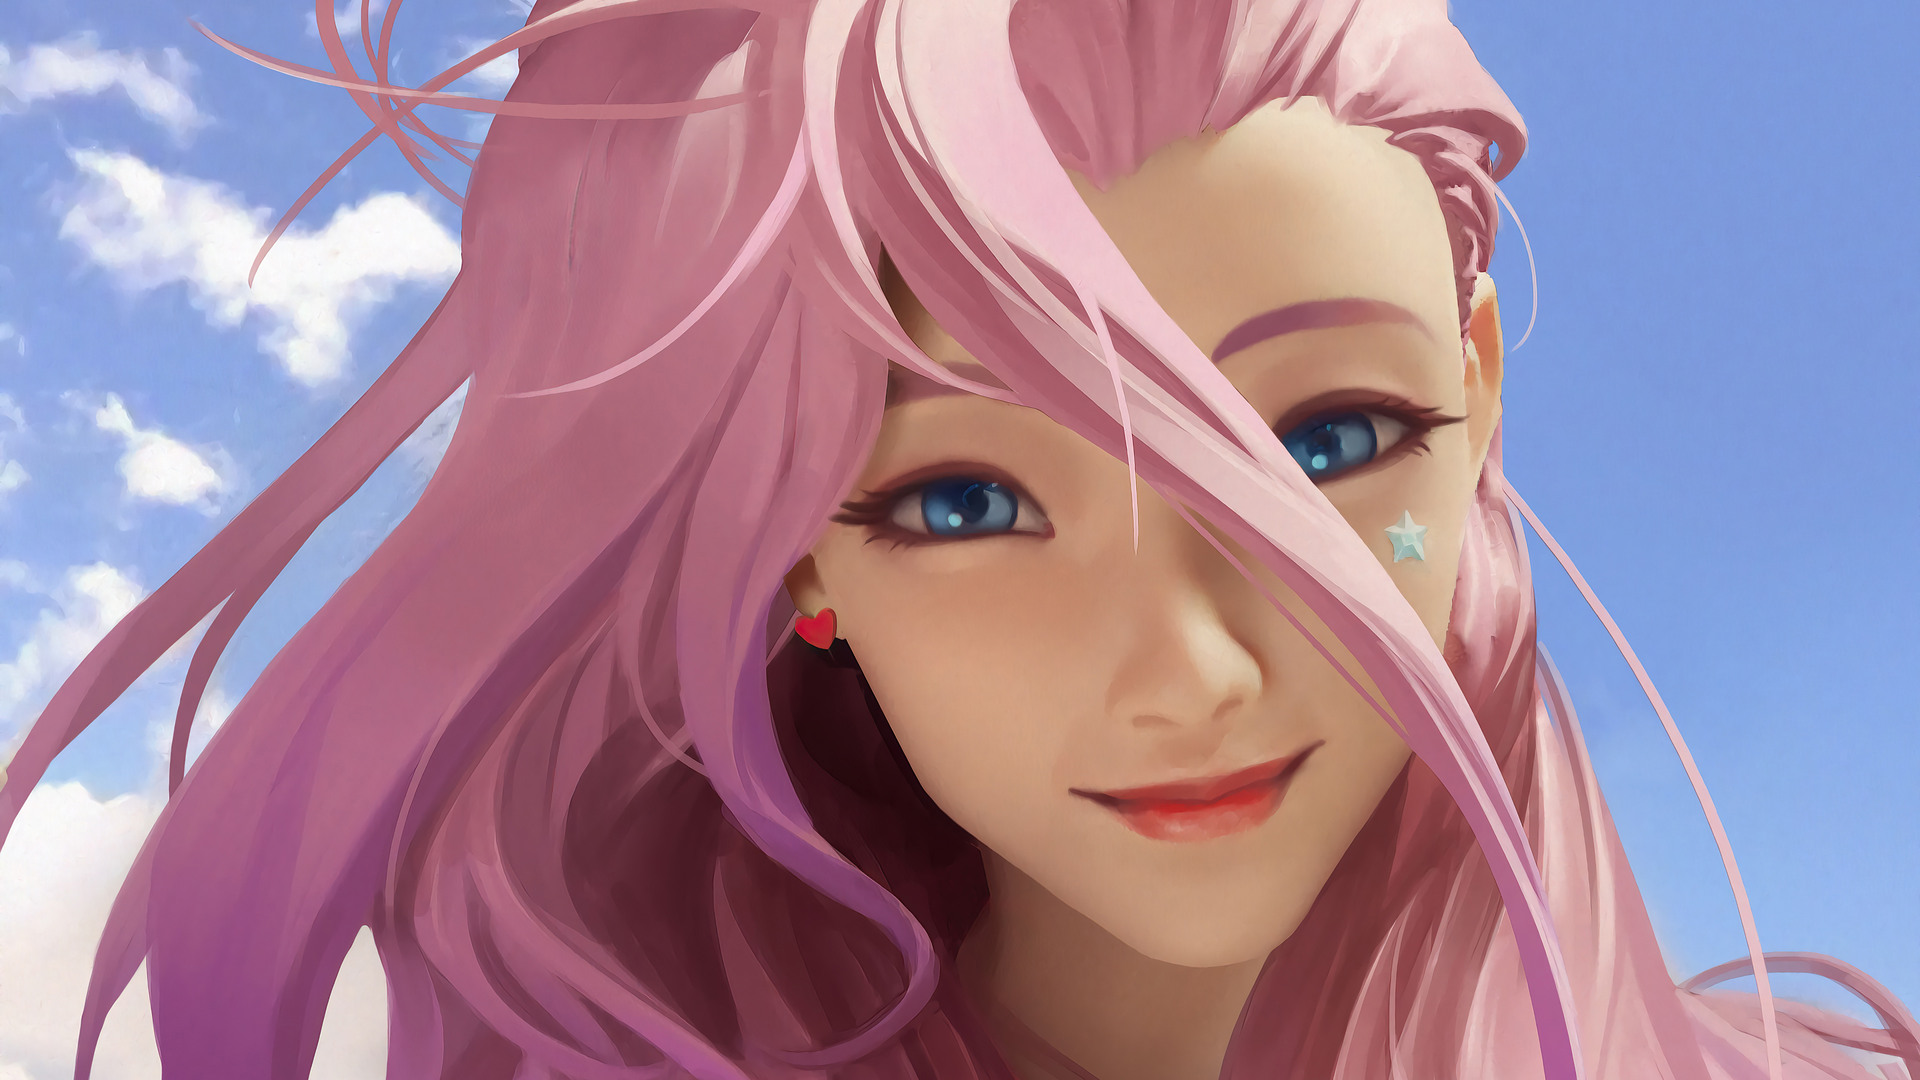 Seraphine League Of Legends Girl Pink Hair Blue Eyes 1920x1080